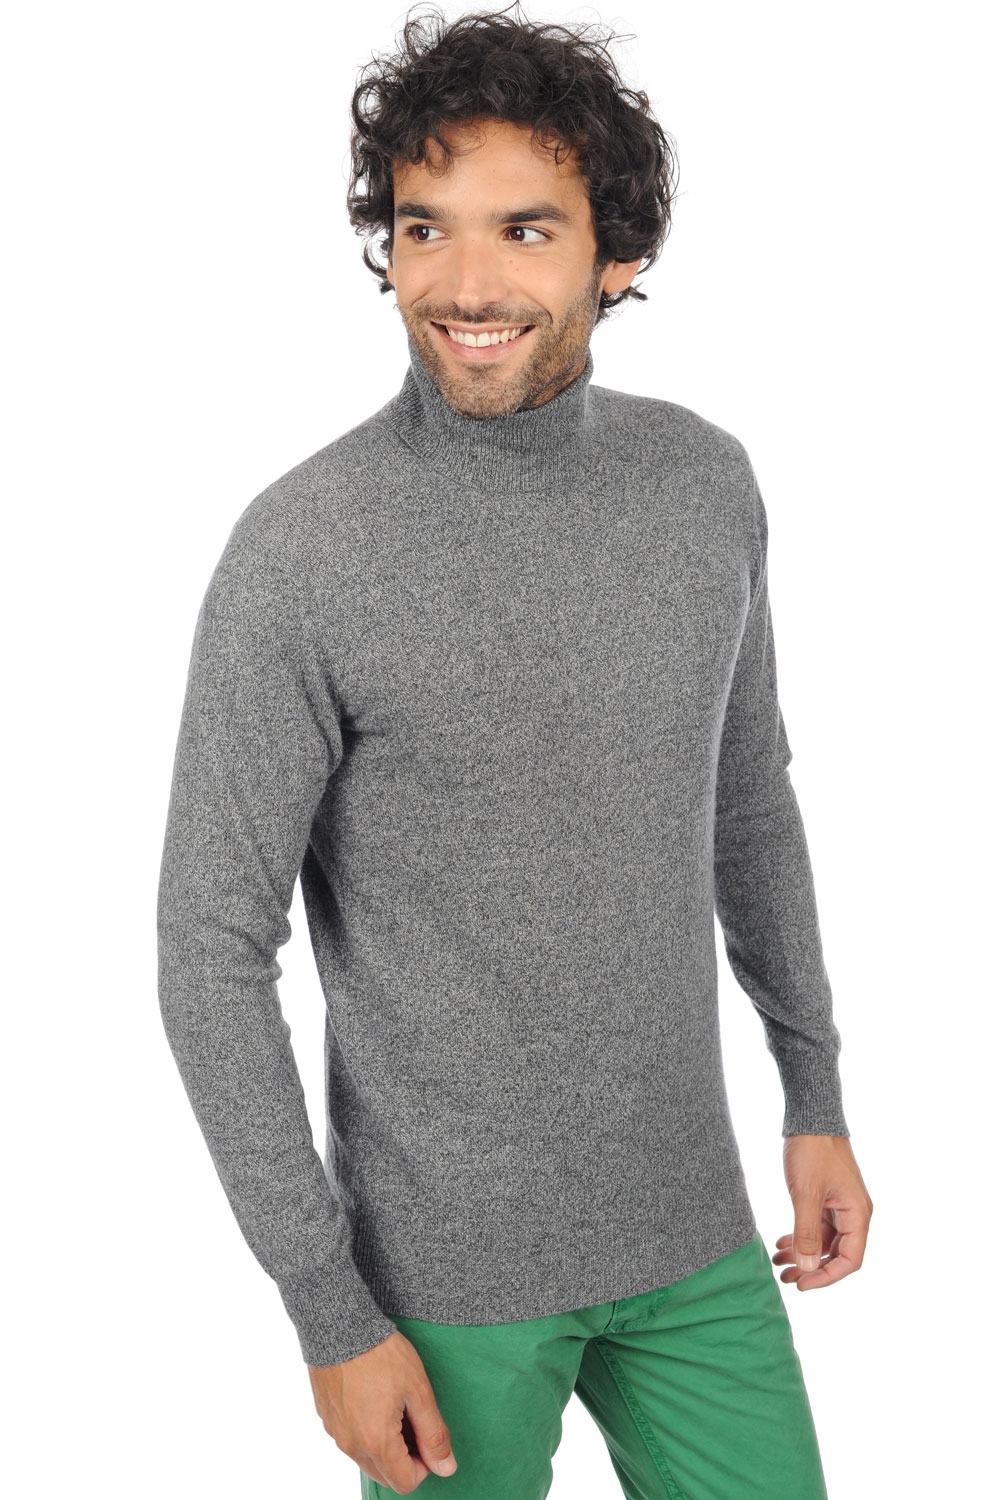 Cachemire petits prix homme tarry first silver grey m